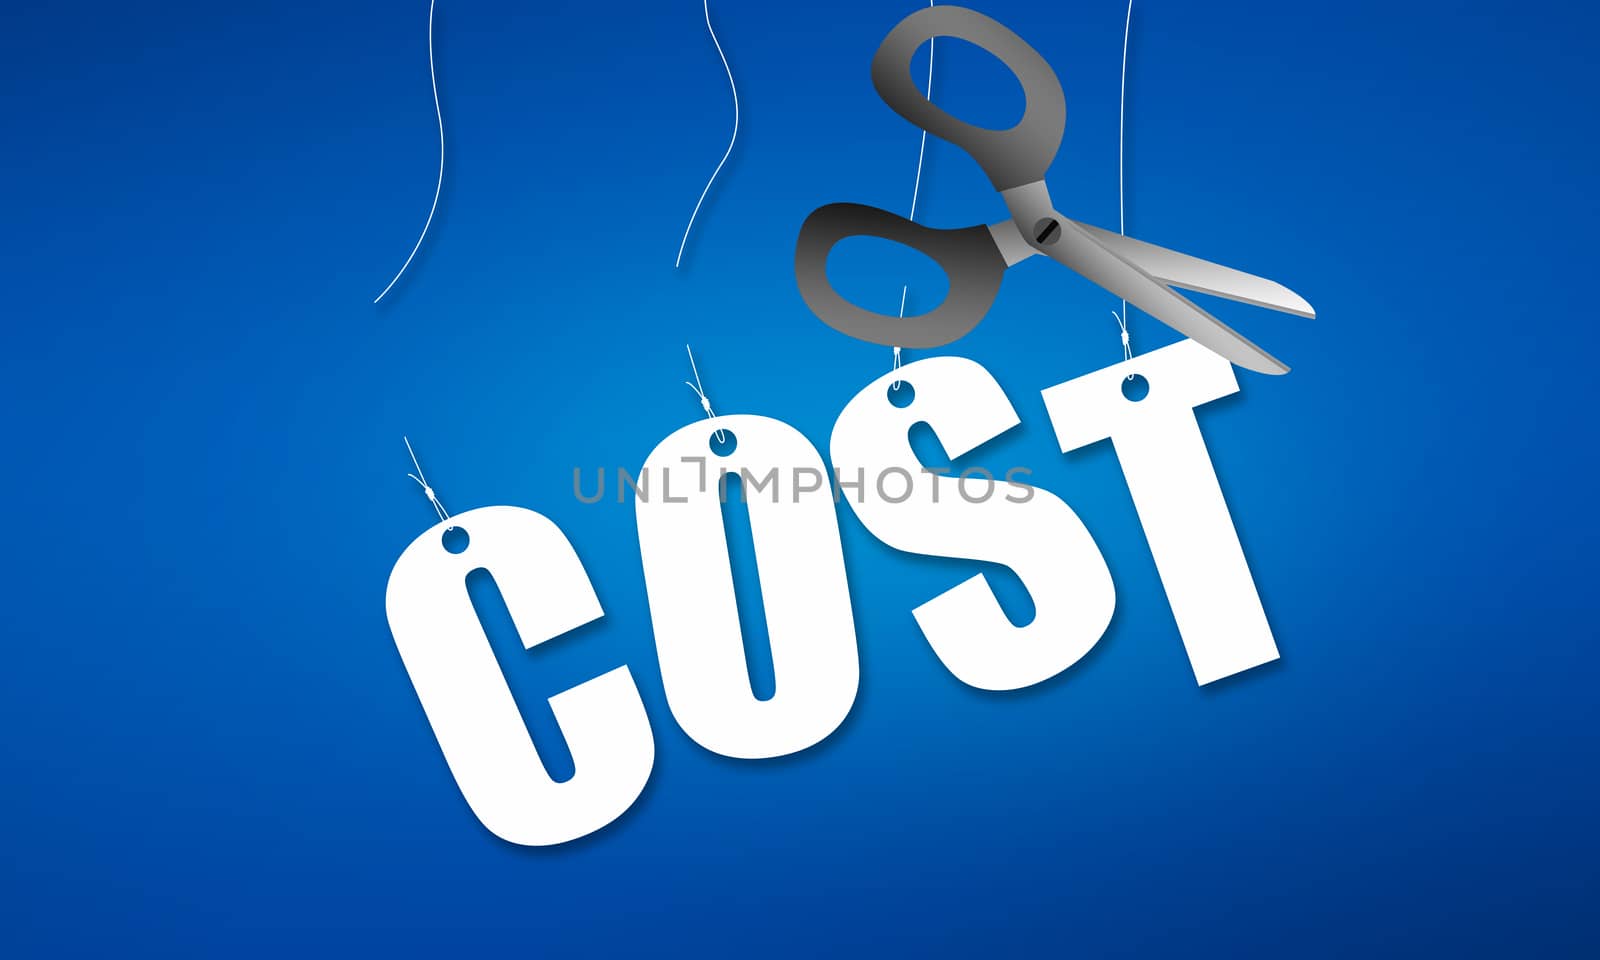 Use scissors to cut away cost word, 3d rendering